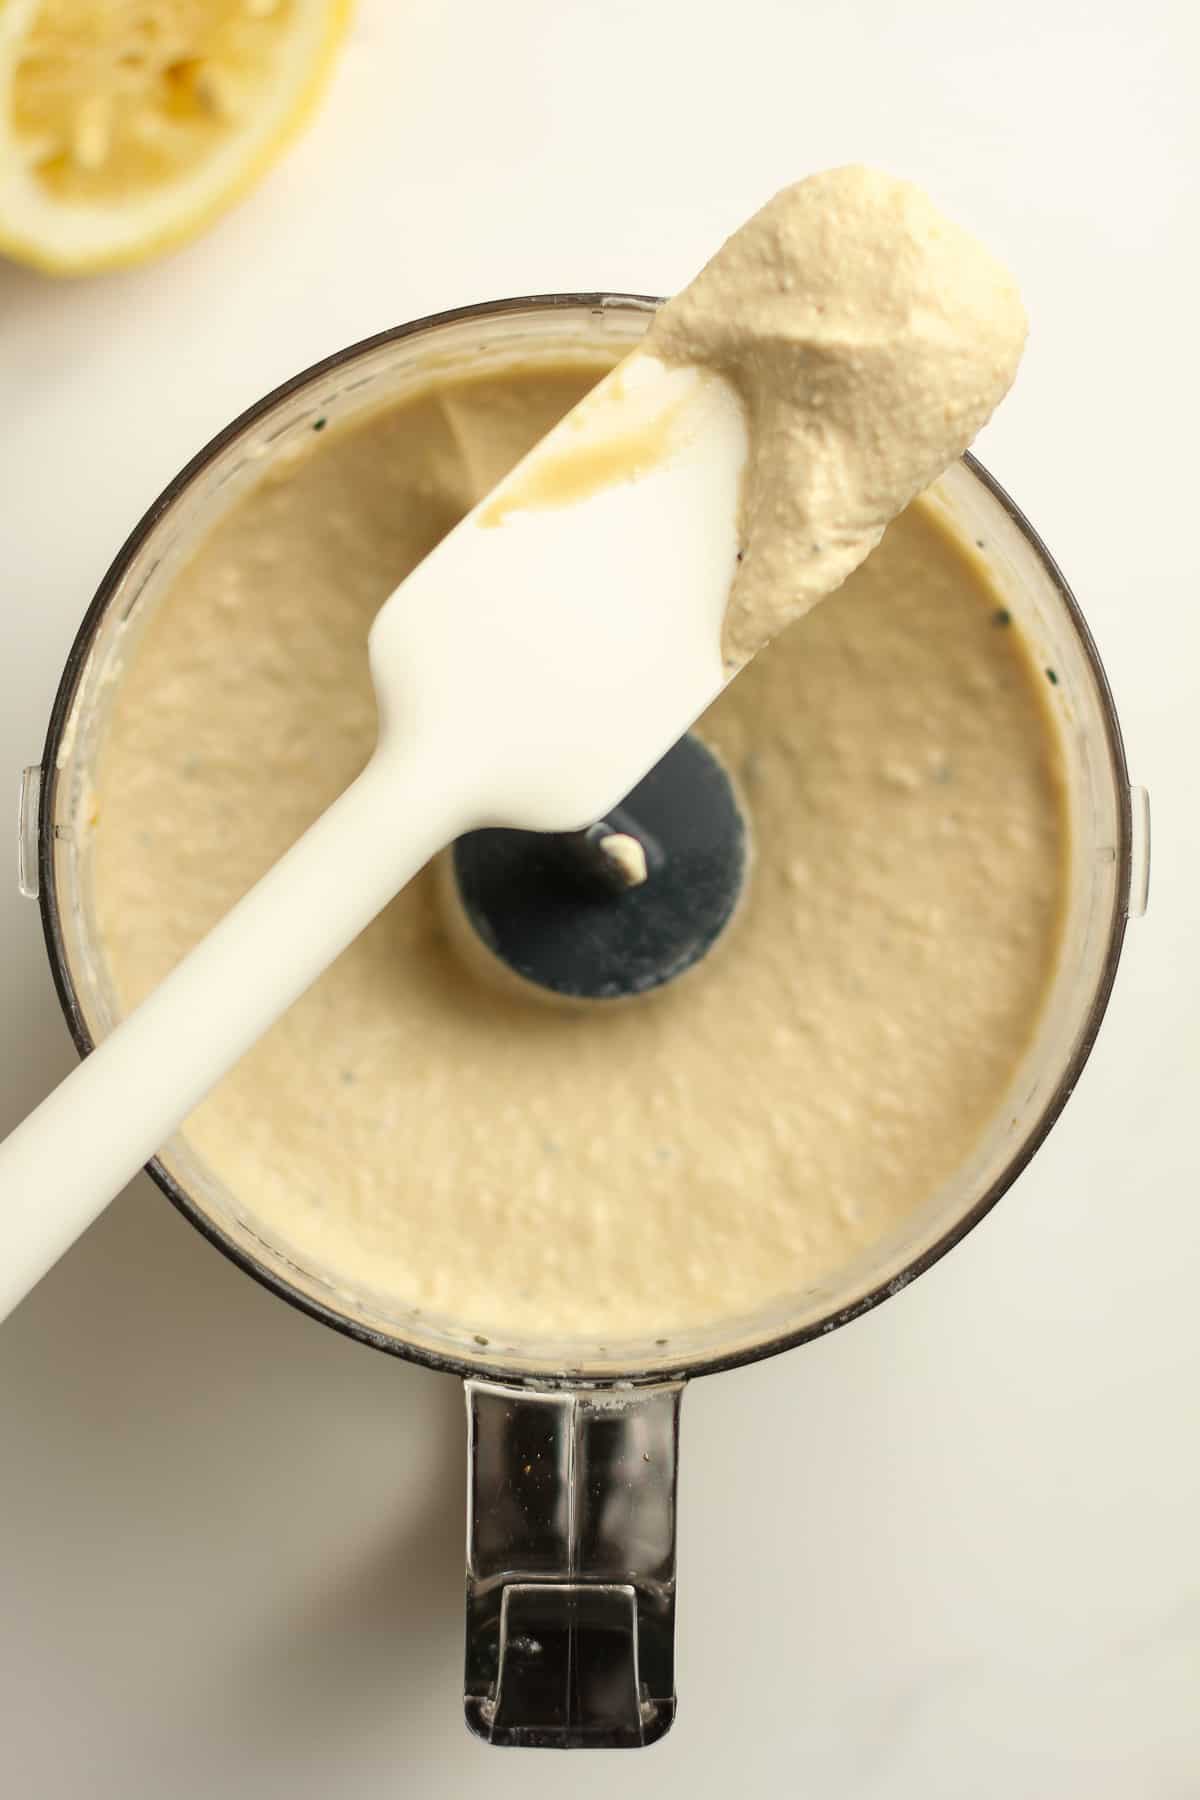 A spatula on top of a mini food processor showing how creamy it is.